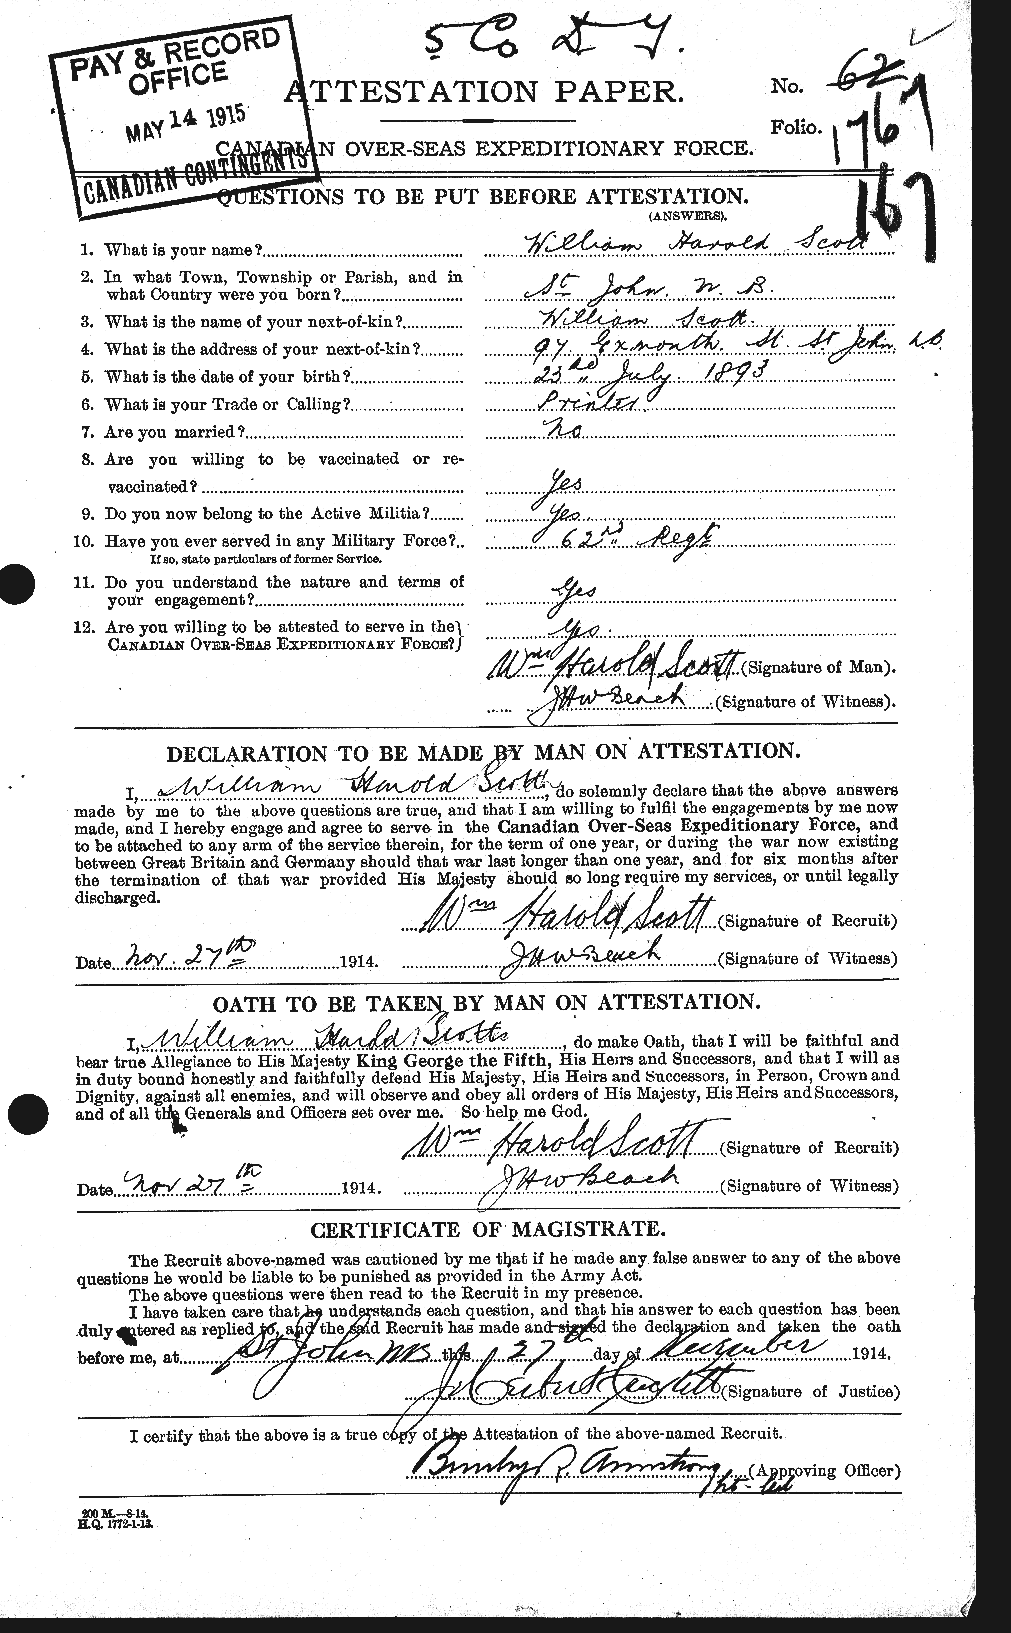 Personnel Records of the First World War - CEF 087001a